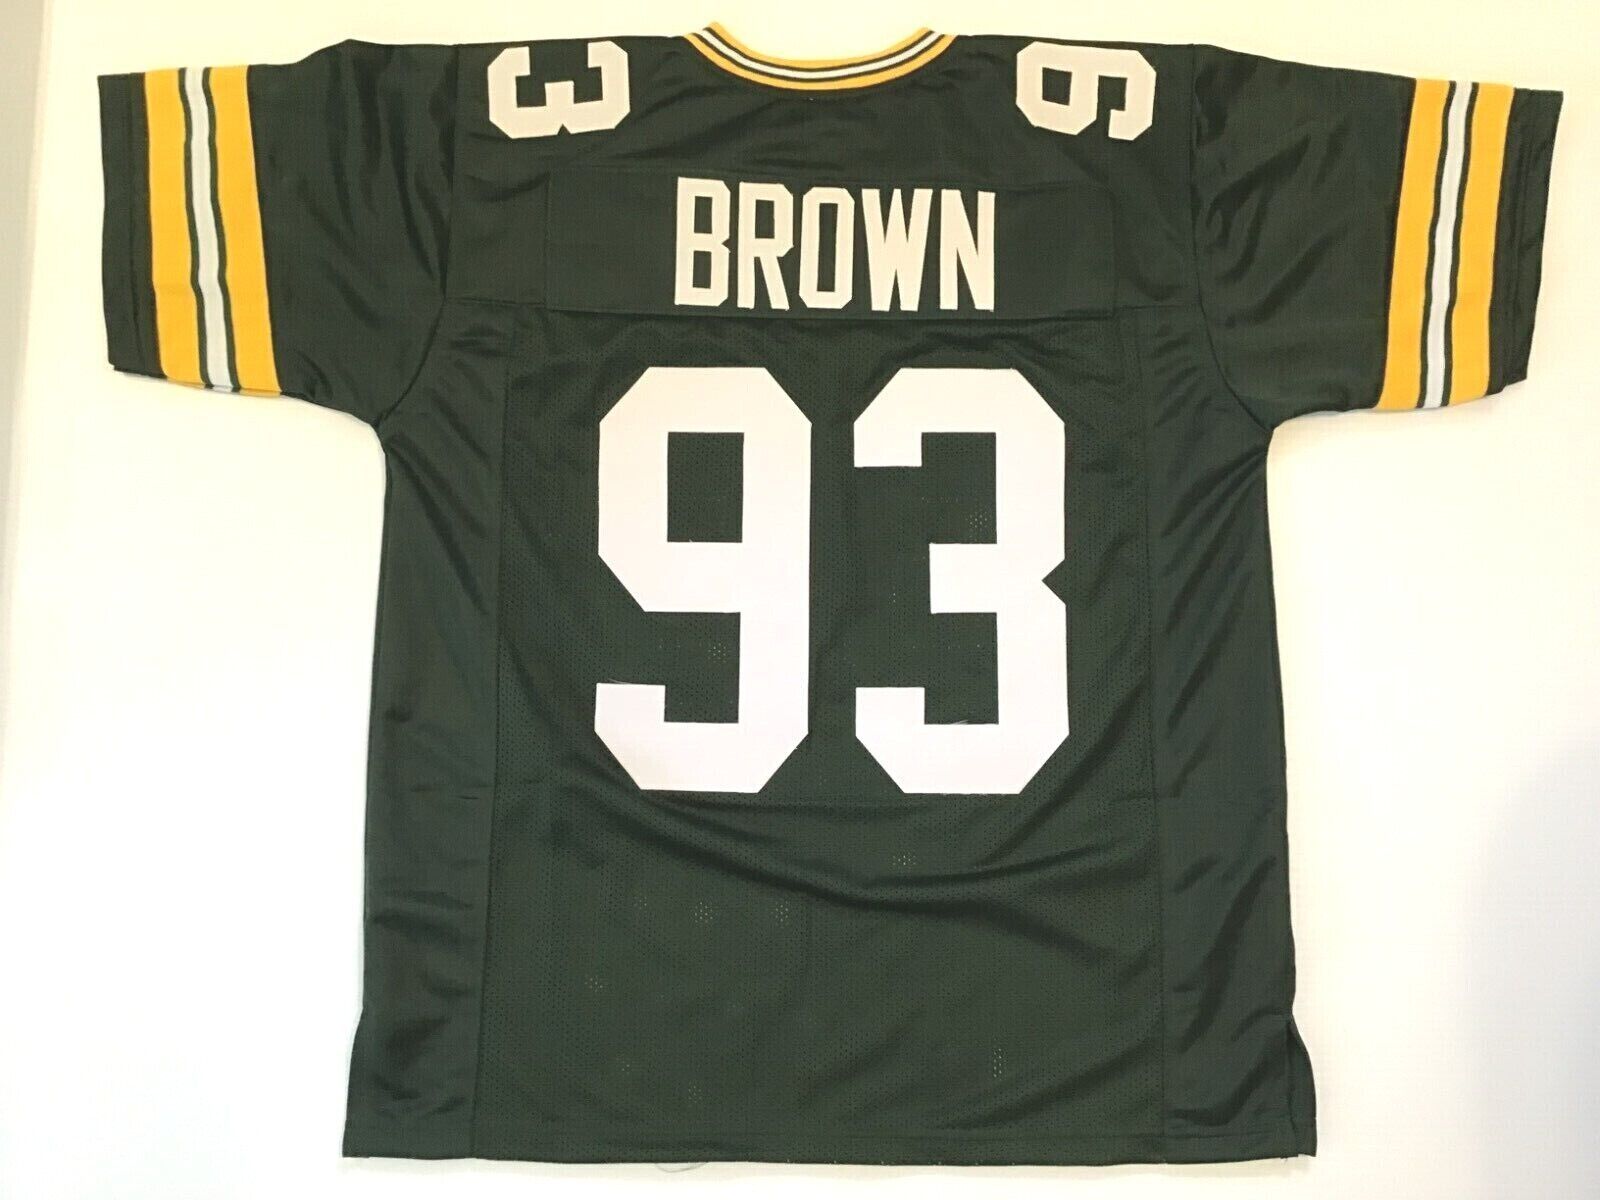 Unbranded Unsigned custom sewn stitched gilbert brown green jersey - m, l, xl, 2xl